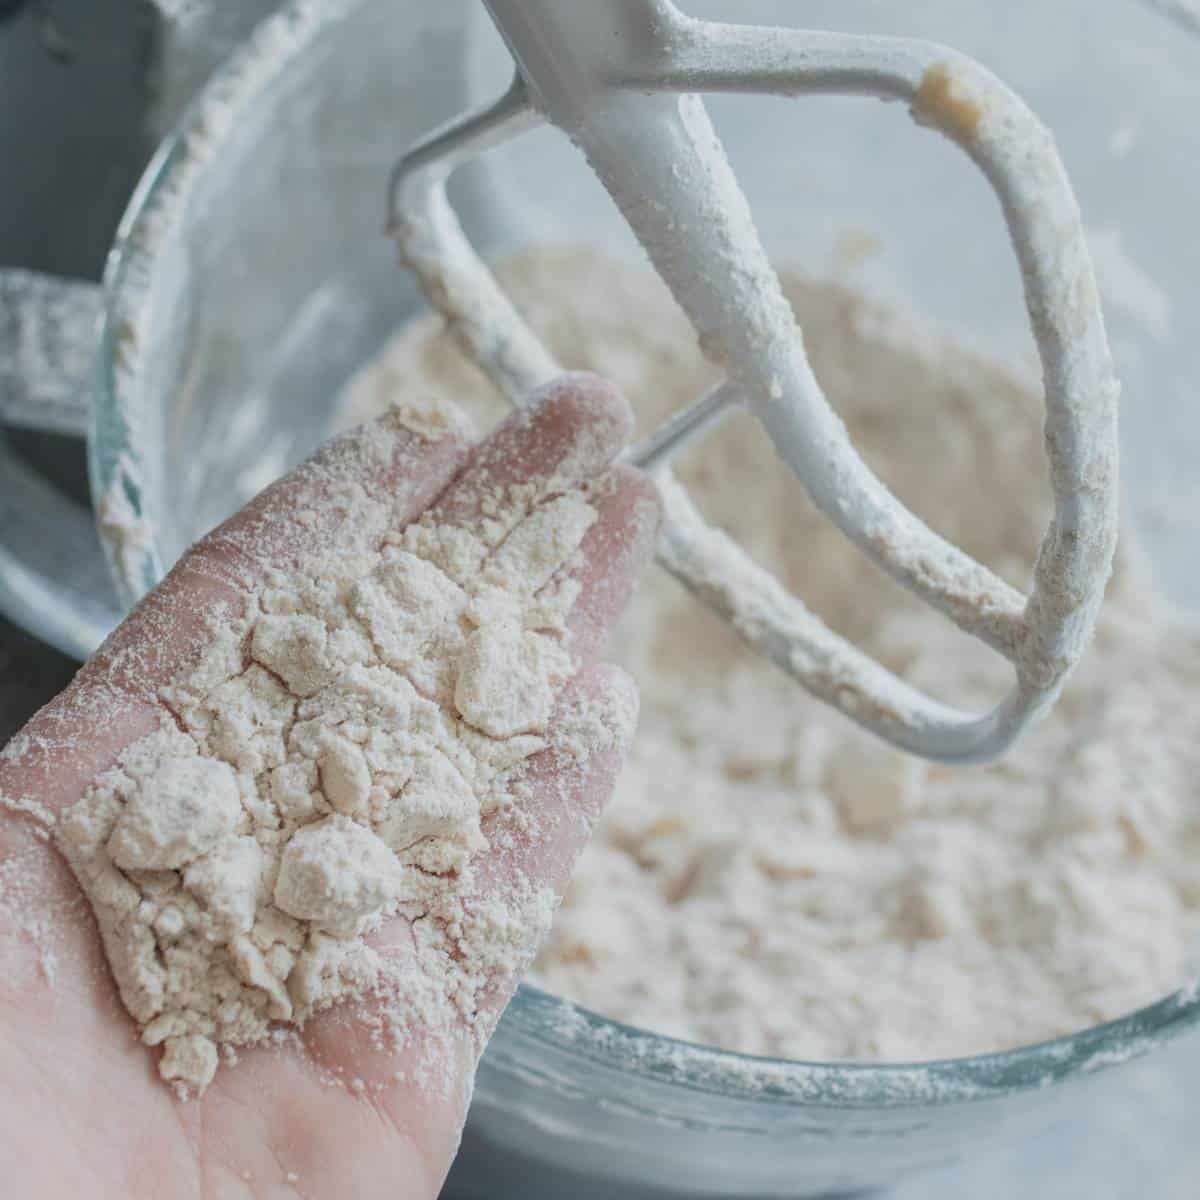 Hand with dough in it over an electric mixer to show consistency of dry ingredients mixed with butter.